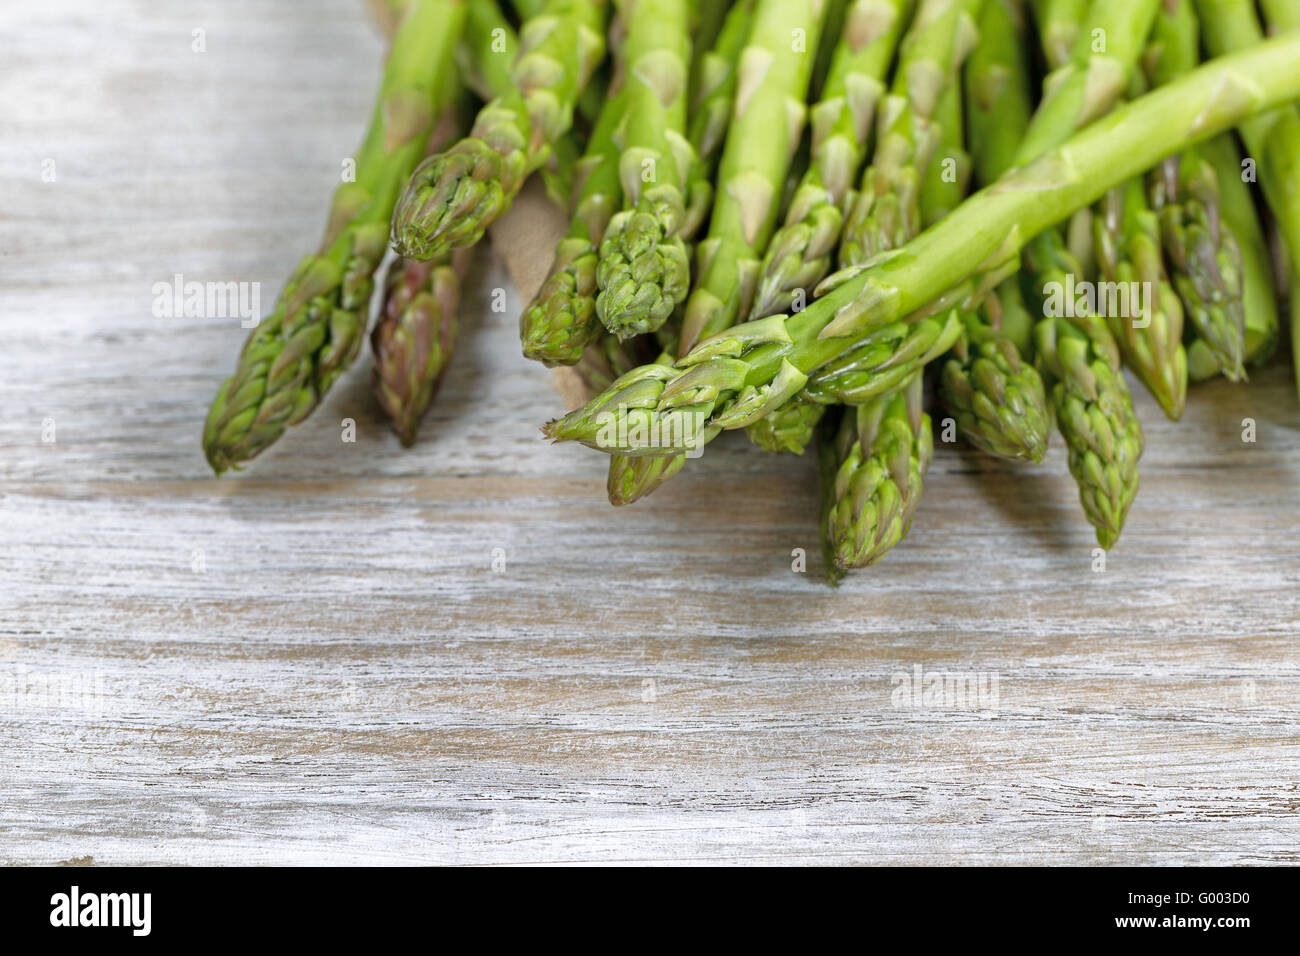 Raw Asparagus ready to cook Stock Photo